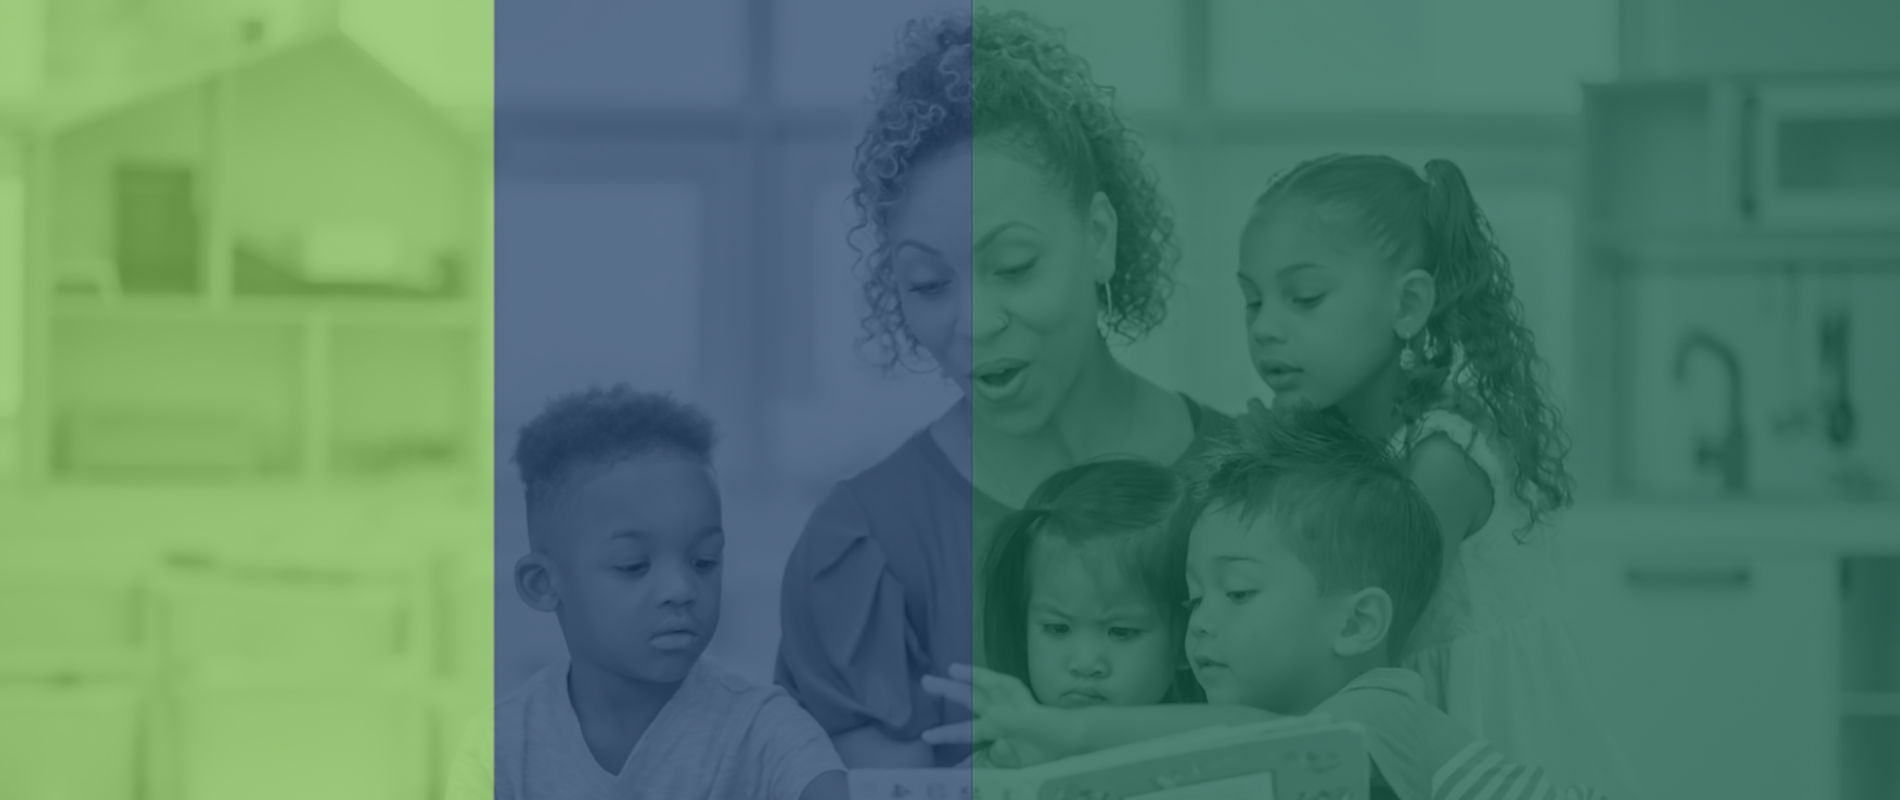 Early Childhood Access Consortium for Equity